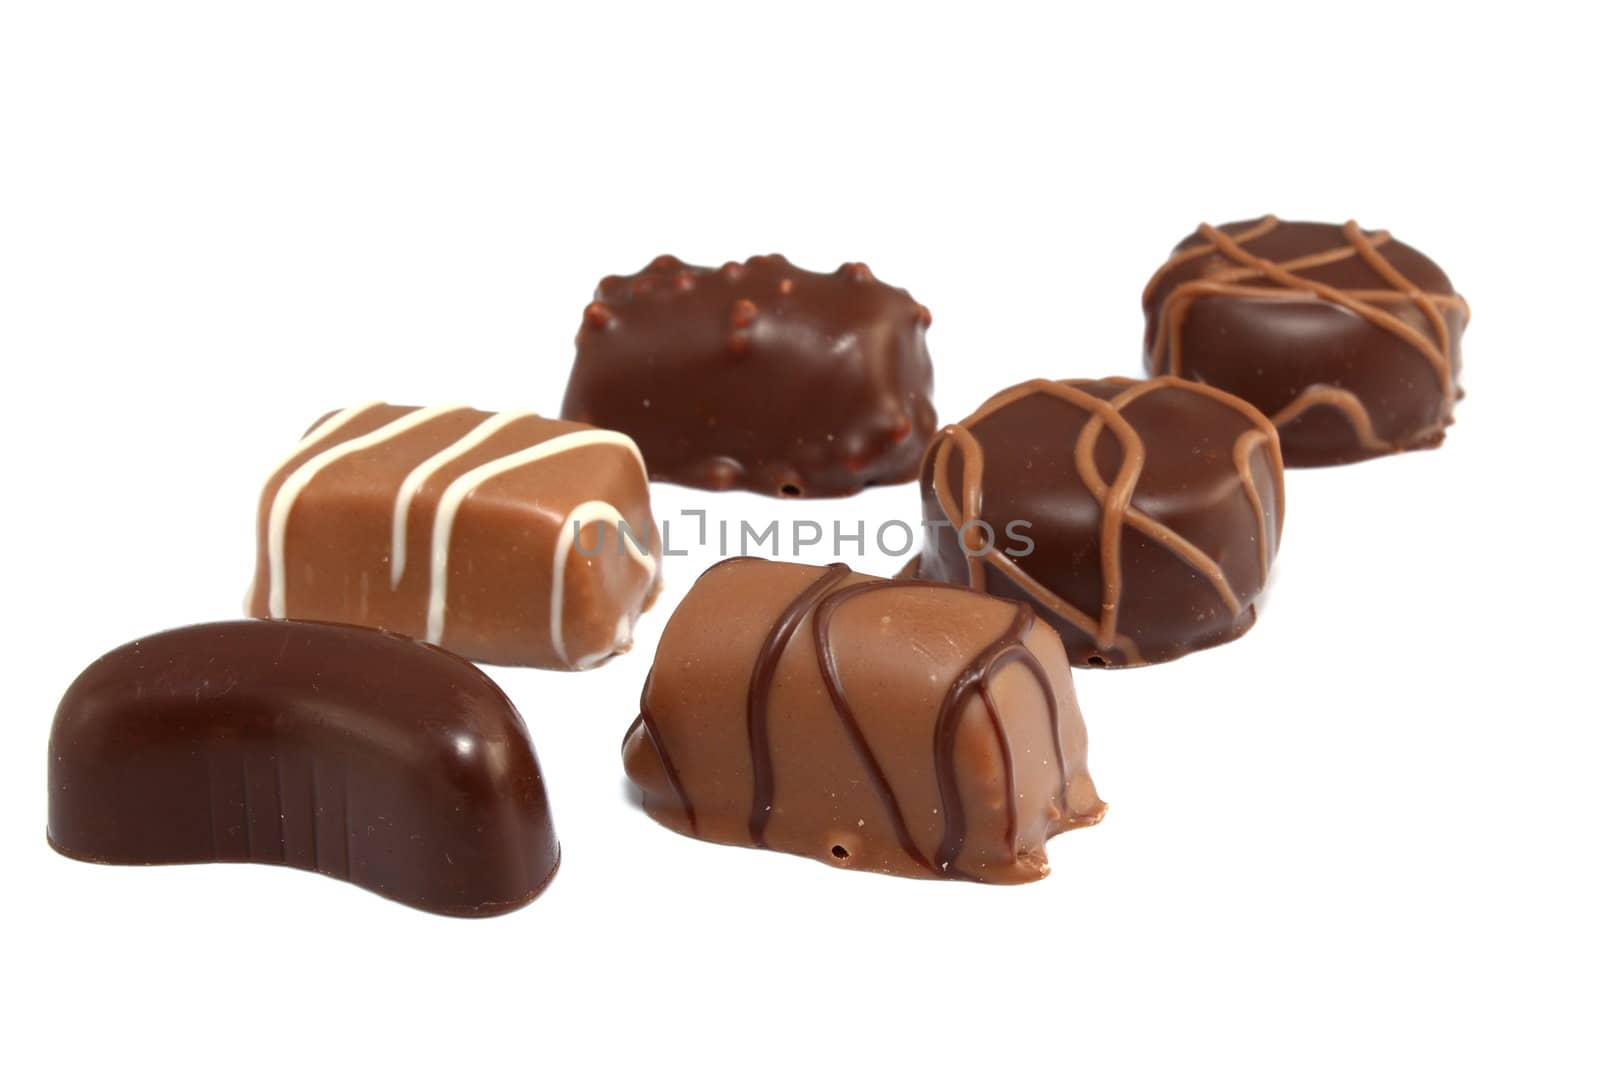 diversified chocolate candies by taviphoto